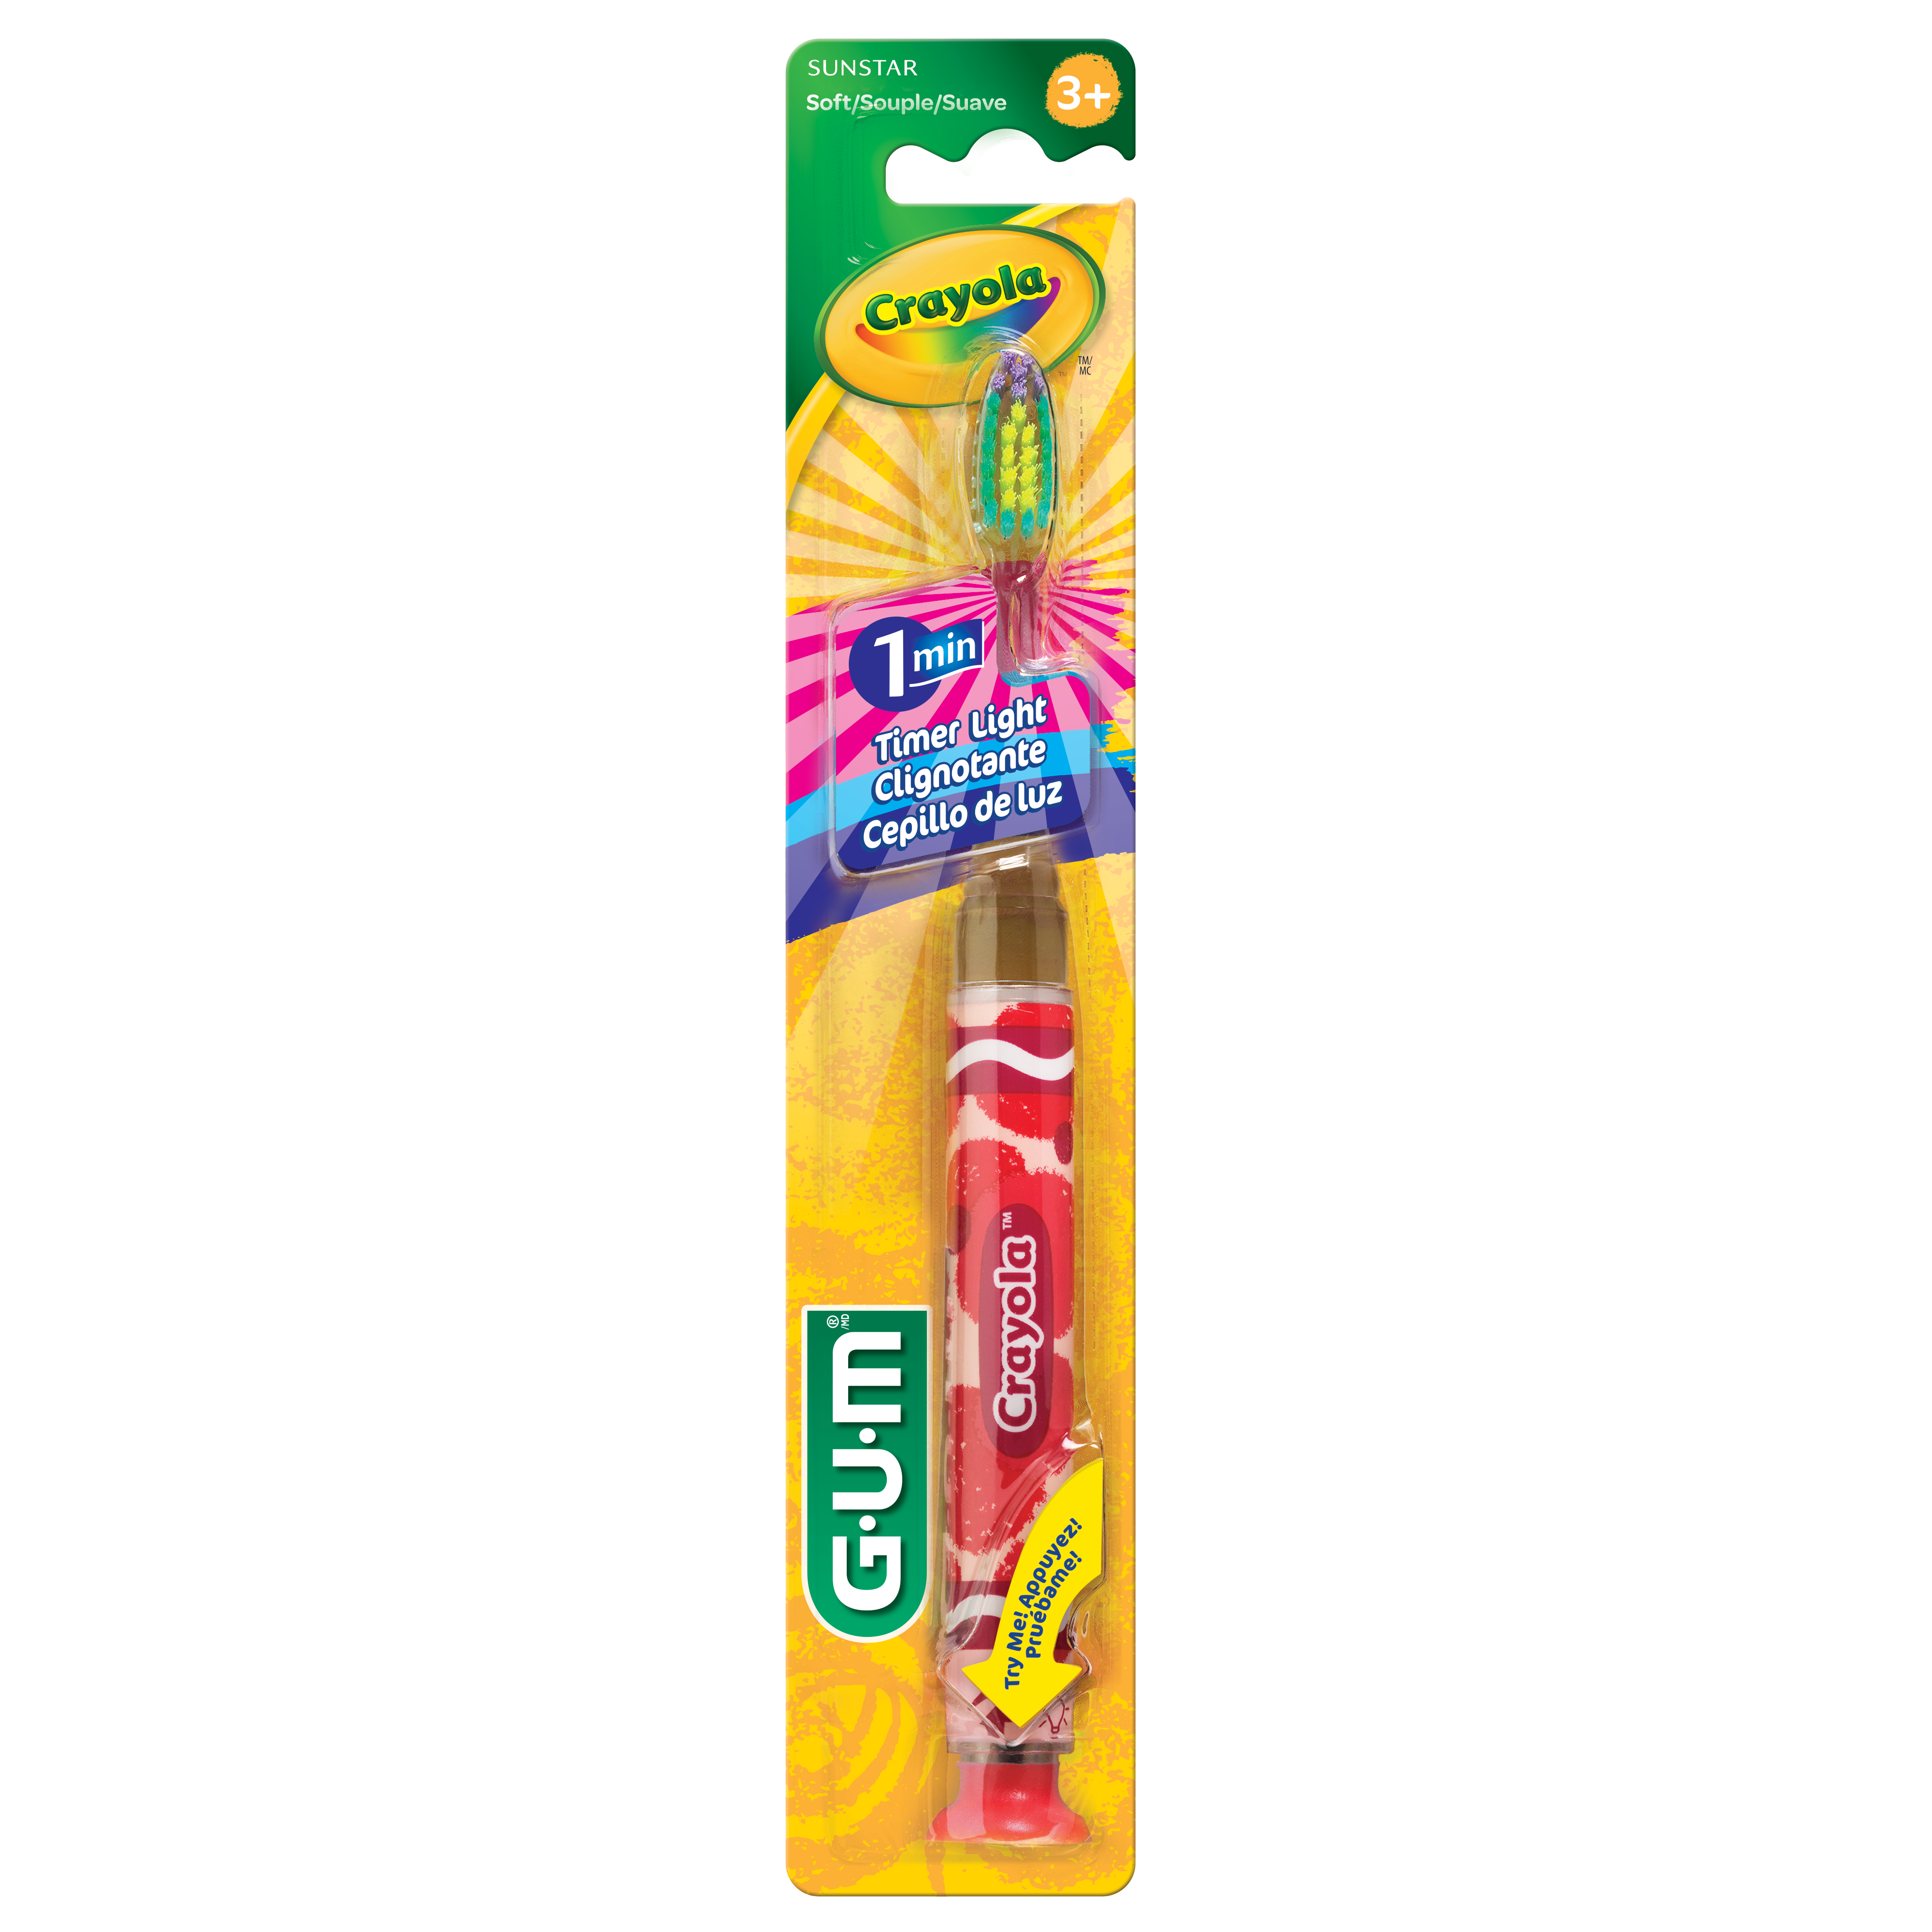 202RL-Product-Packaging-Toothbrush-Crayola-Lightup-front-1ct.png